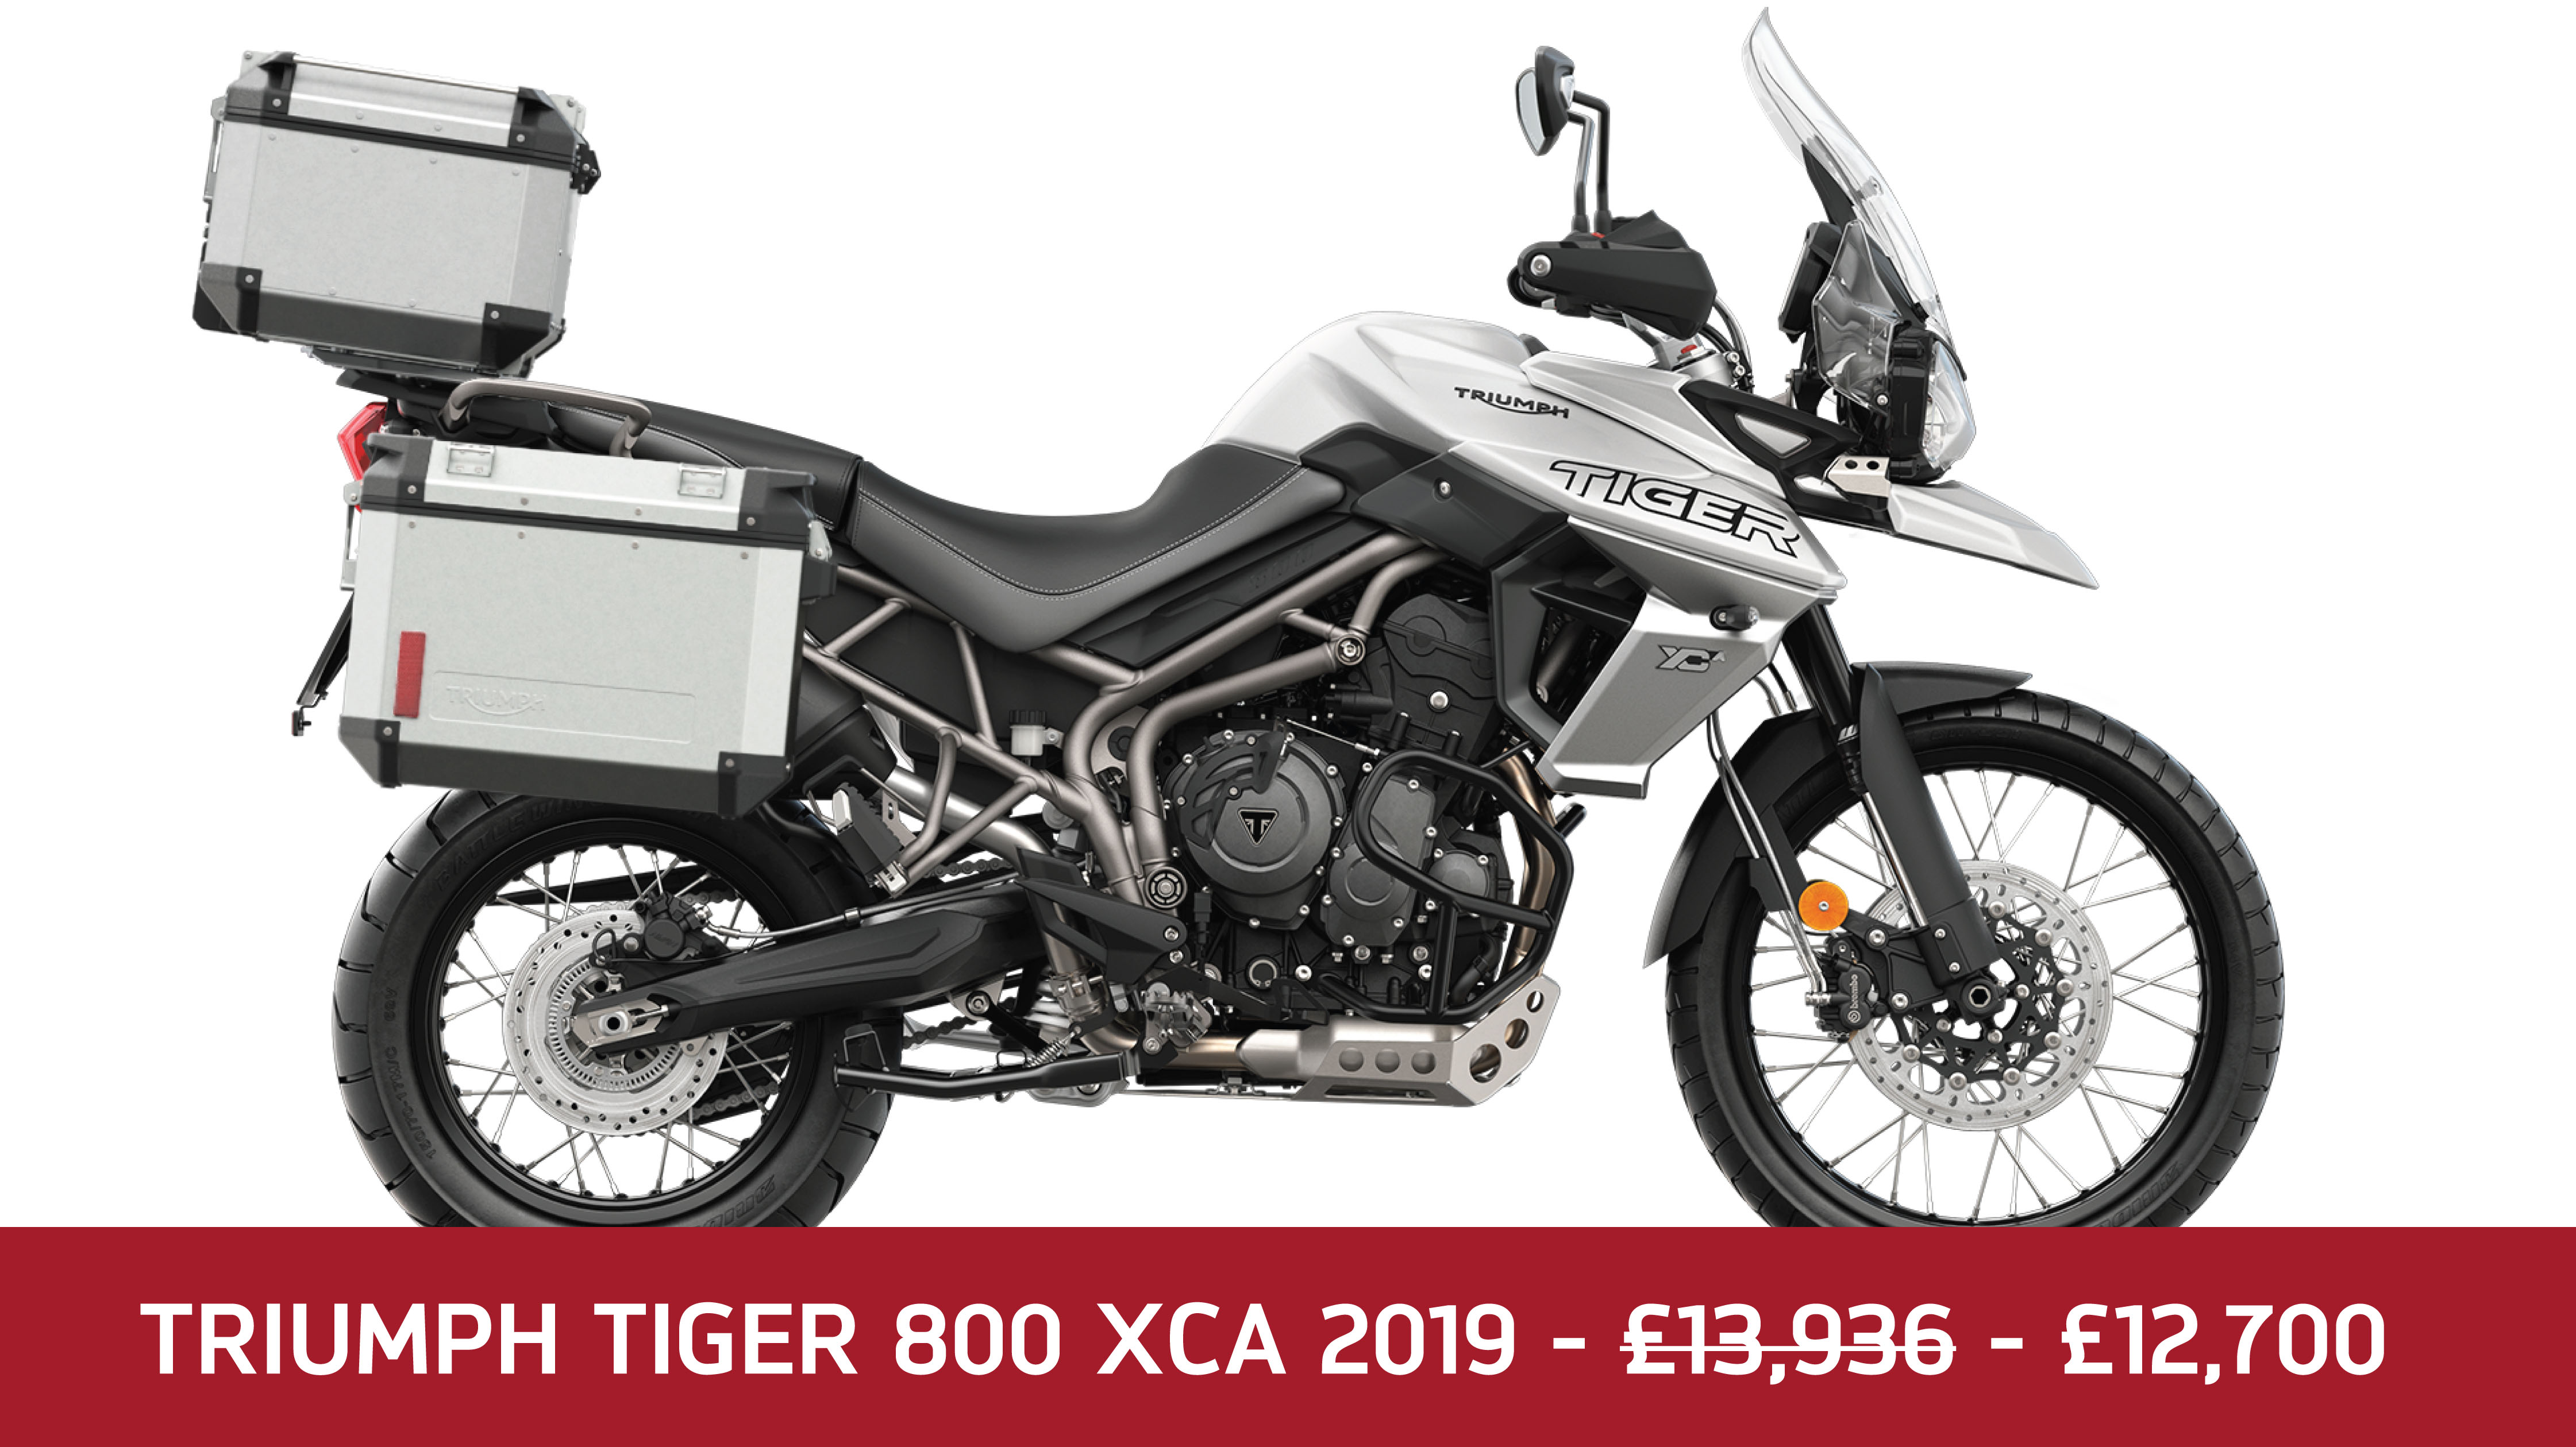 Triumph Tiger 800 XCA 2019 – Complimentary Panniers & Top Box